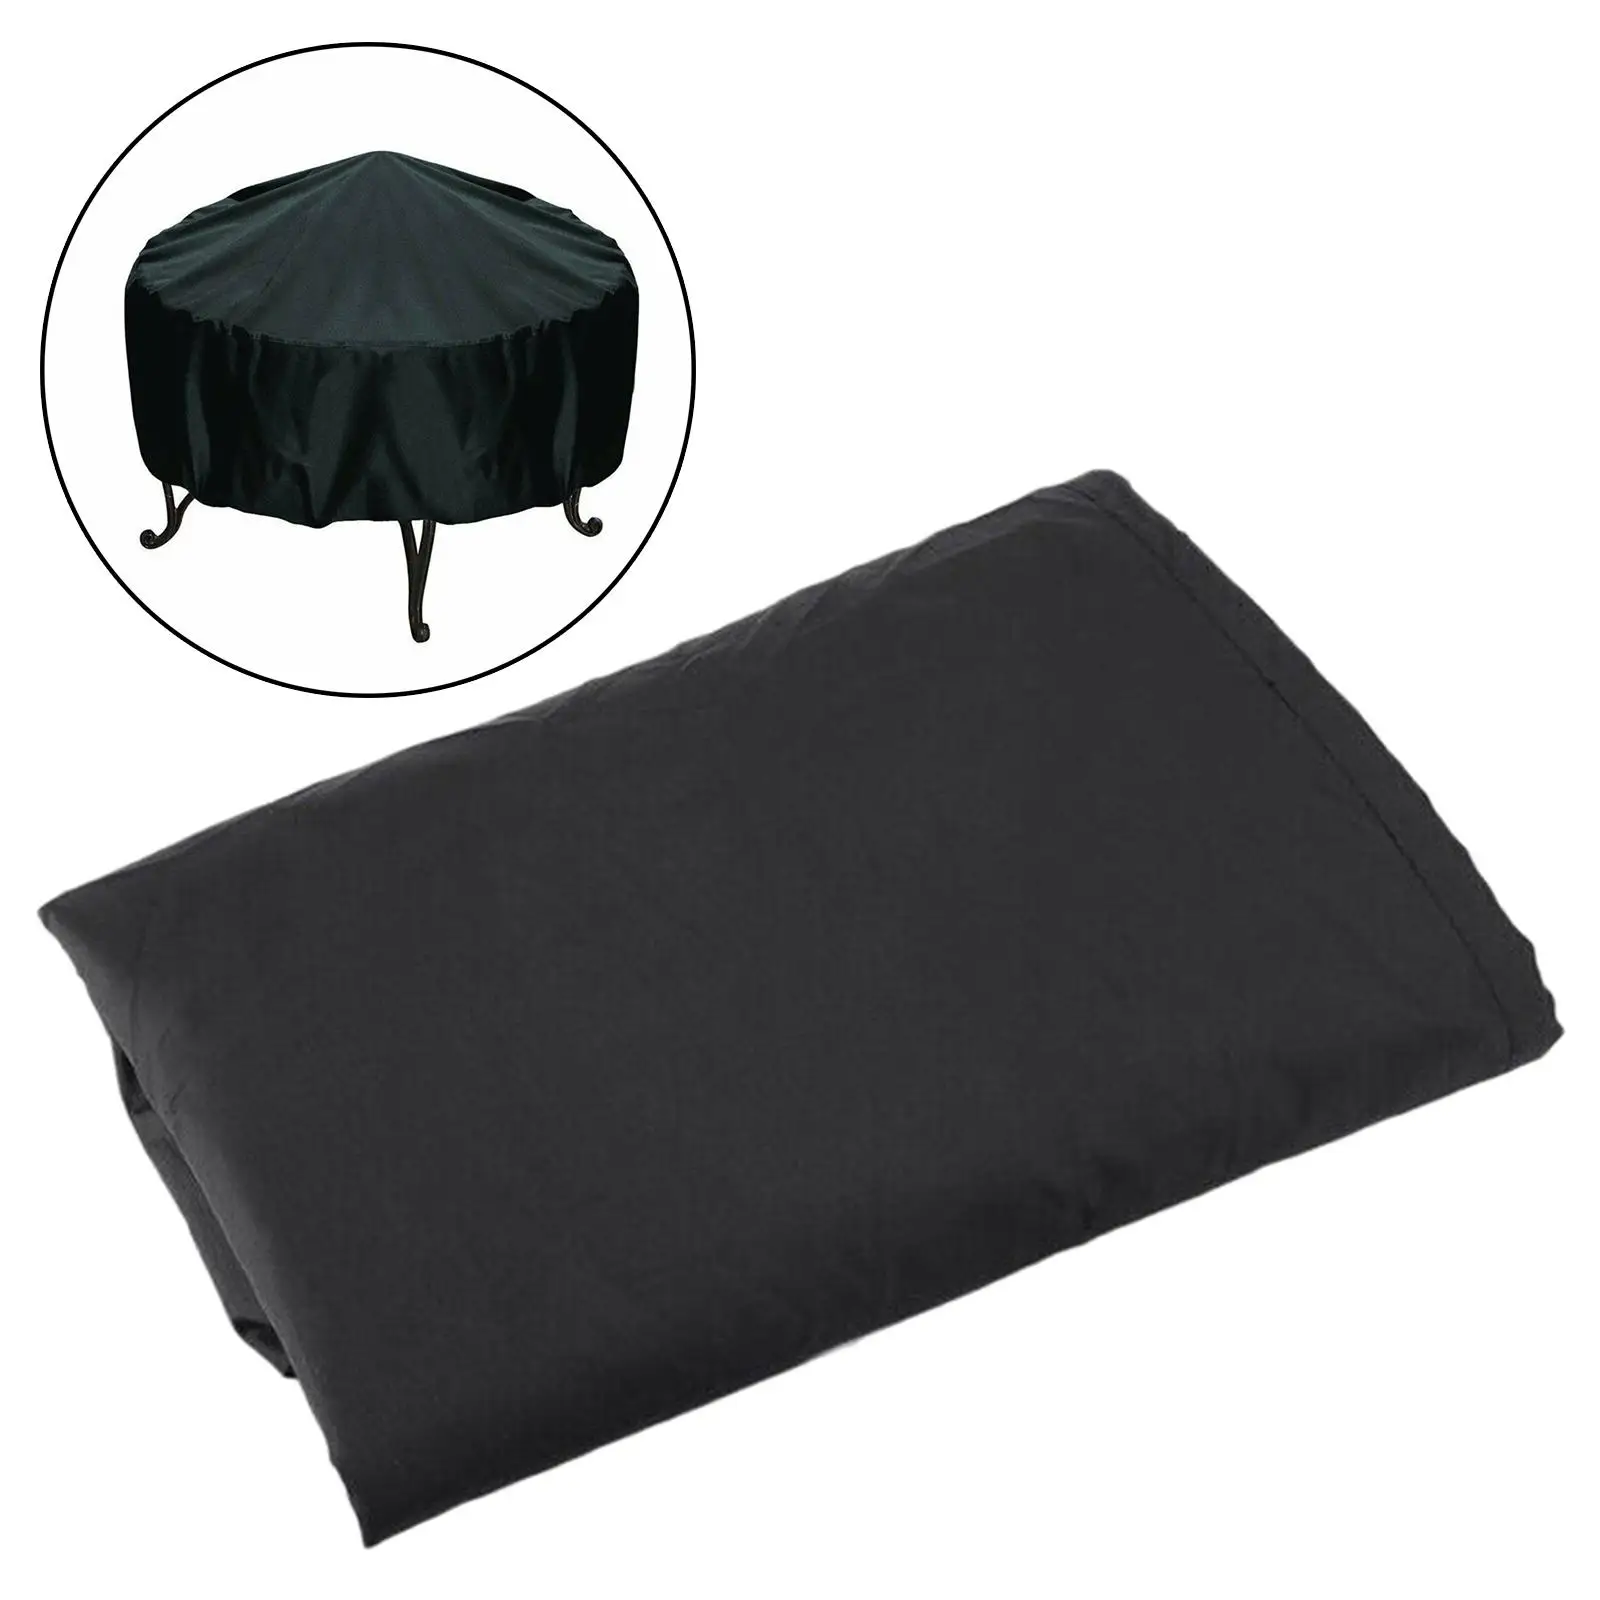 Round Grill Cover Foldable Waterproof Anti Windproof Grill Cover Stove Shield for Indoor Patio Garden BBQ Camping